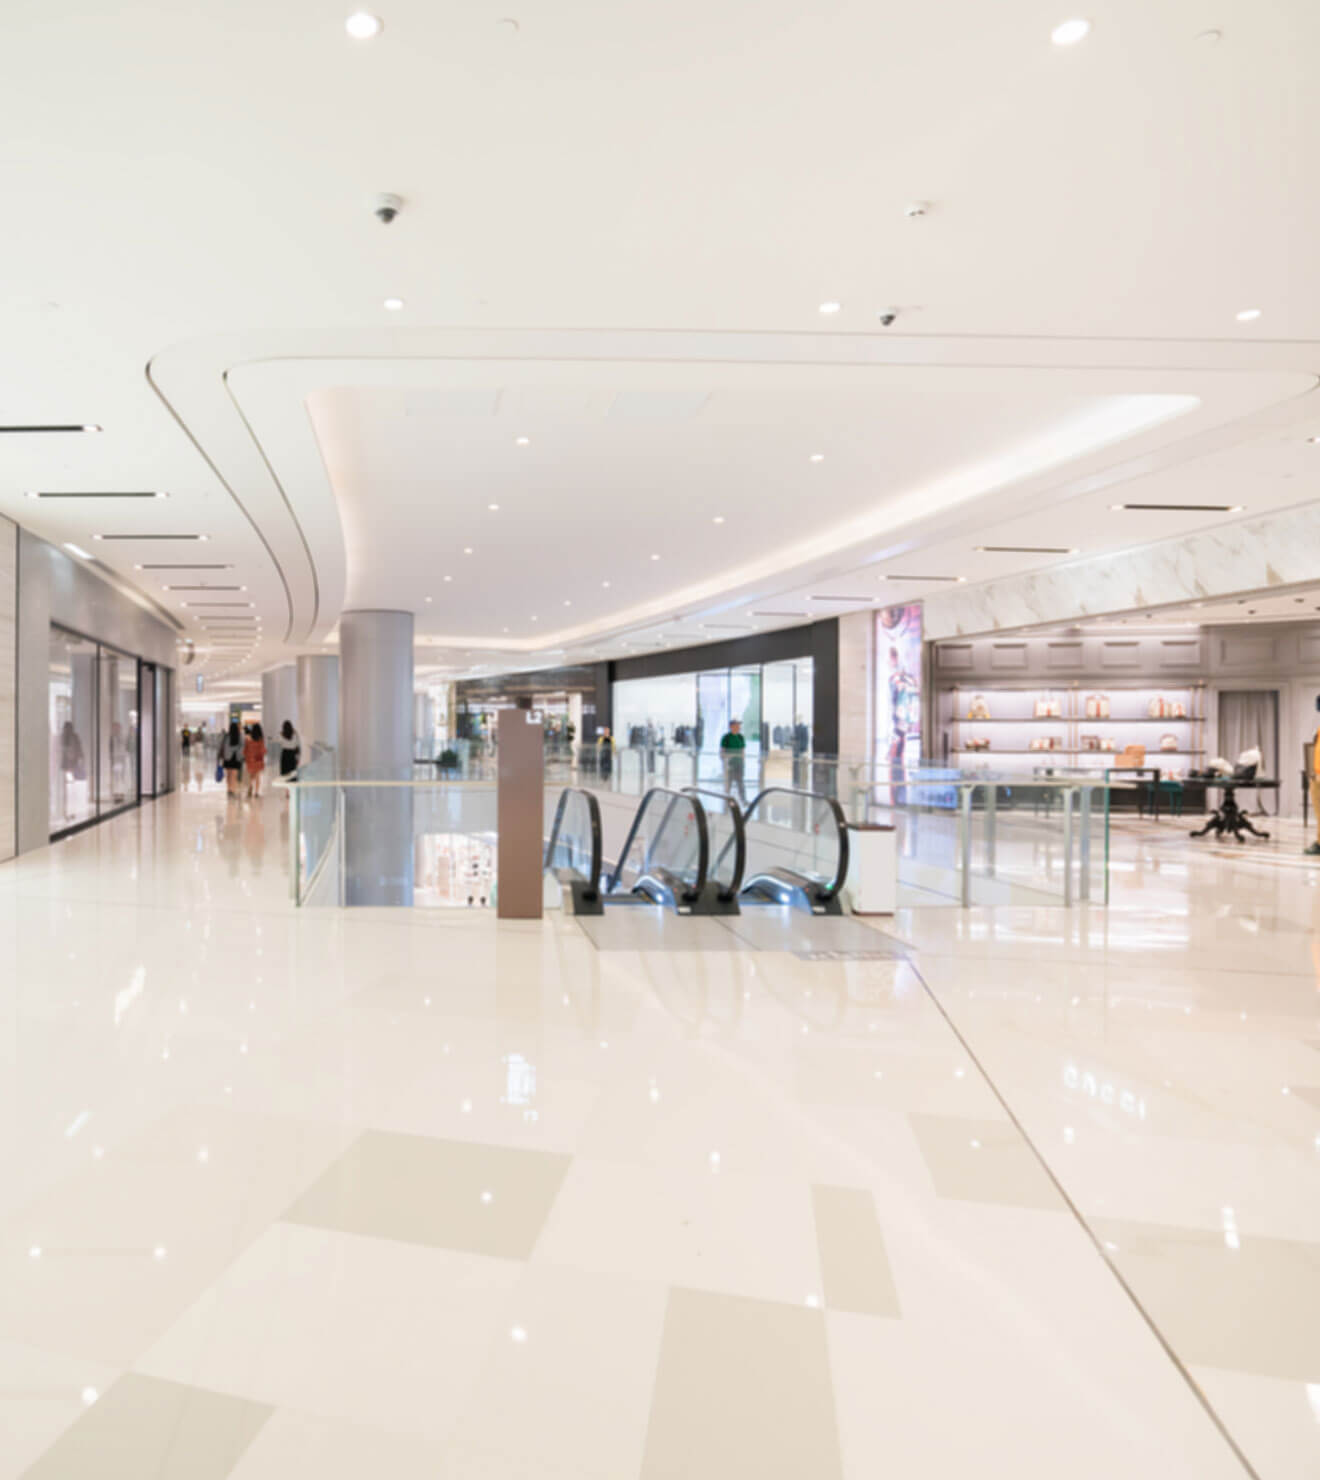 Spacious mall corridor with shining floors treated by Powerit commercial cleaning solution